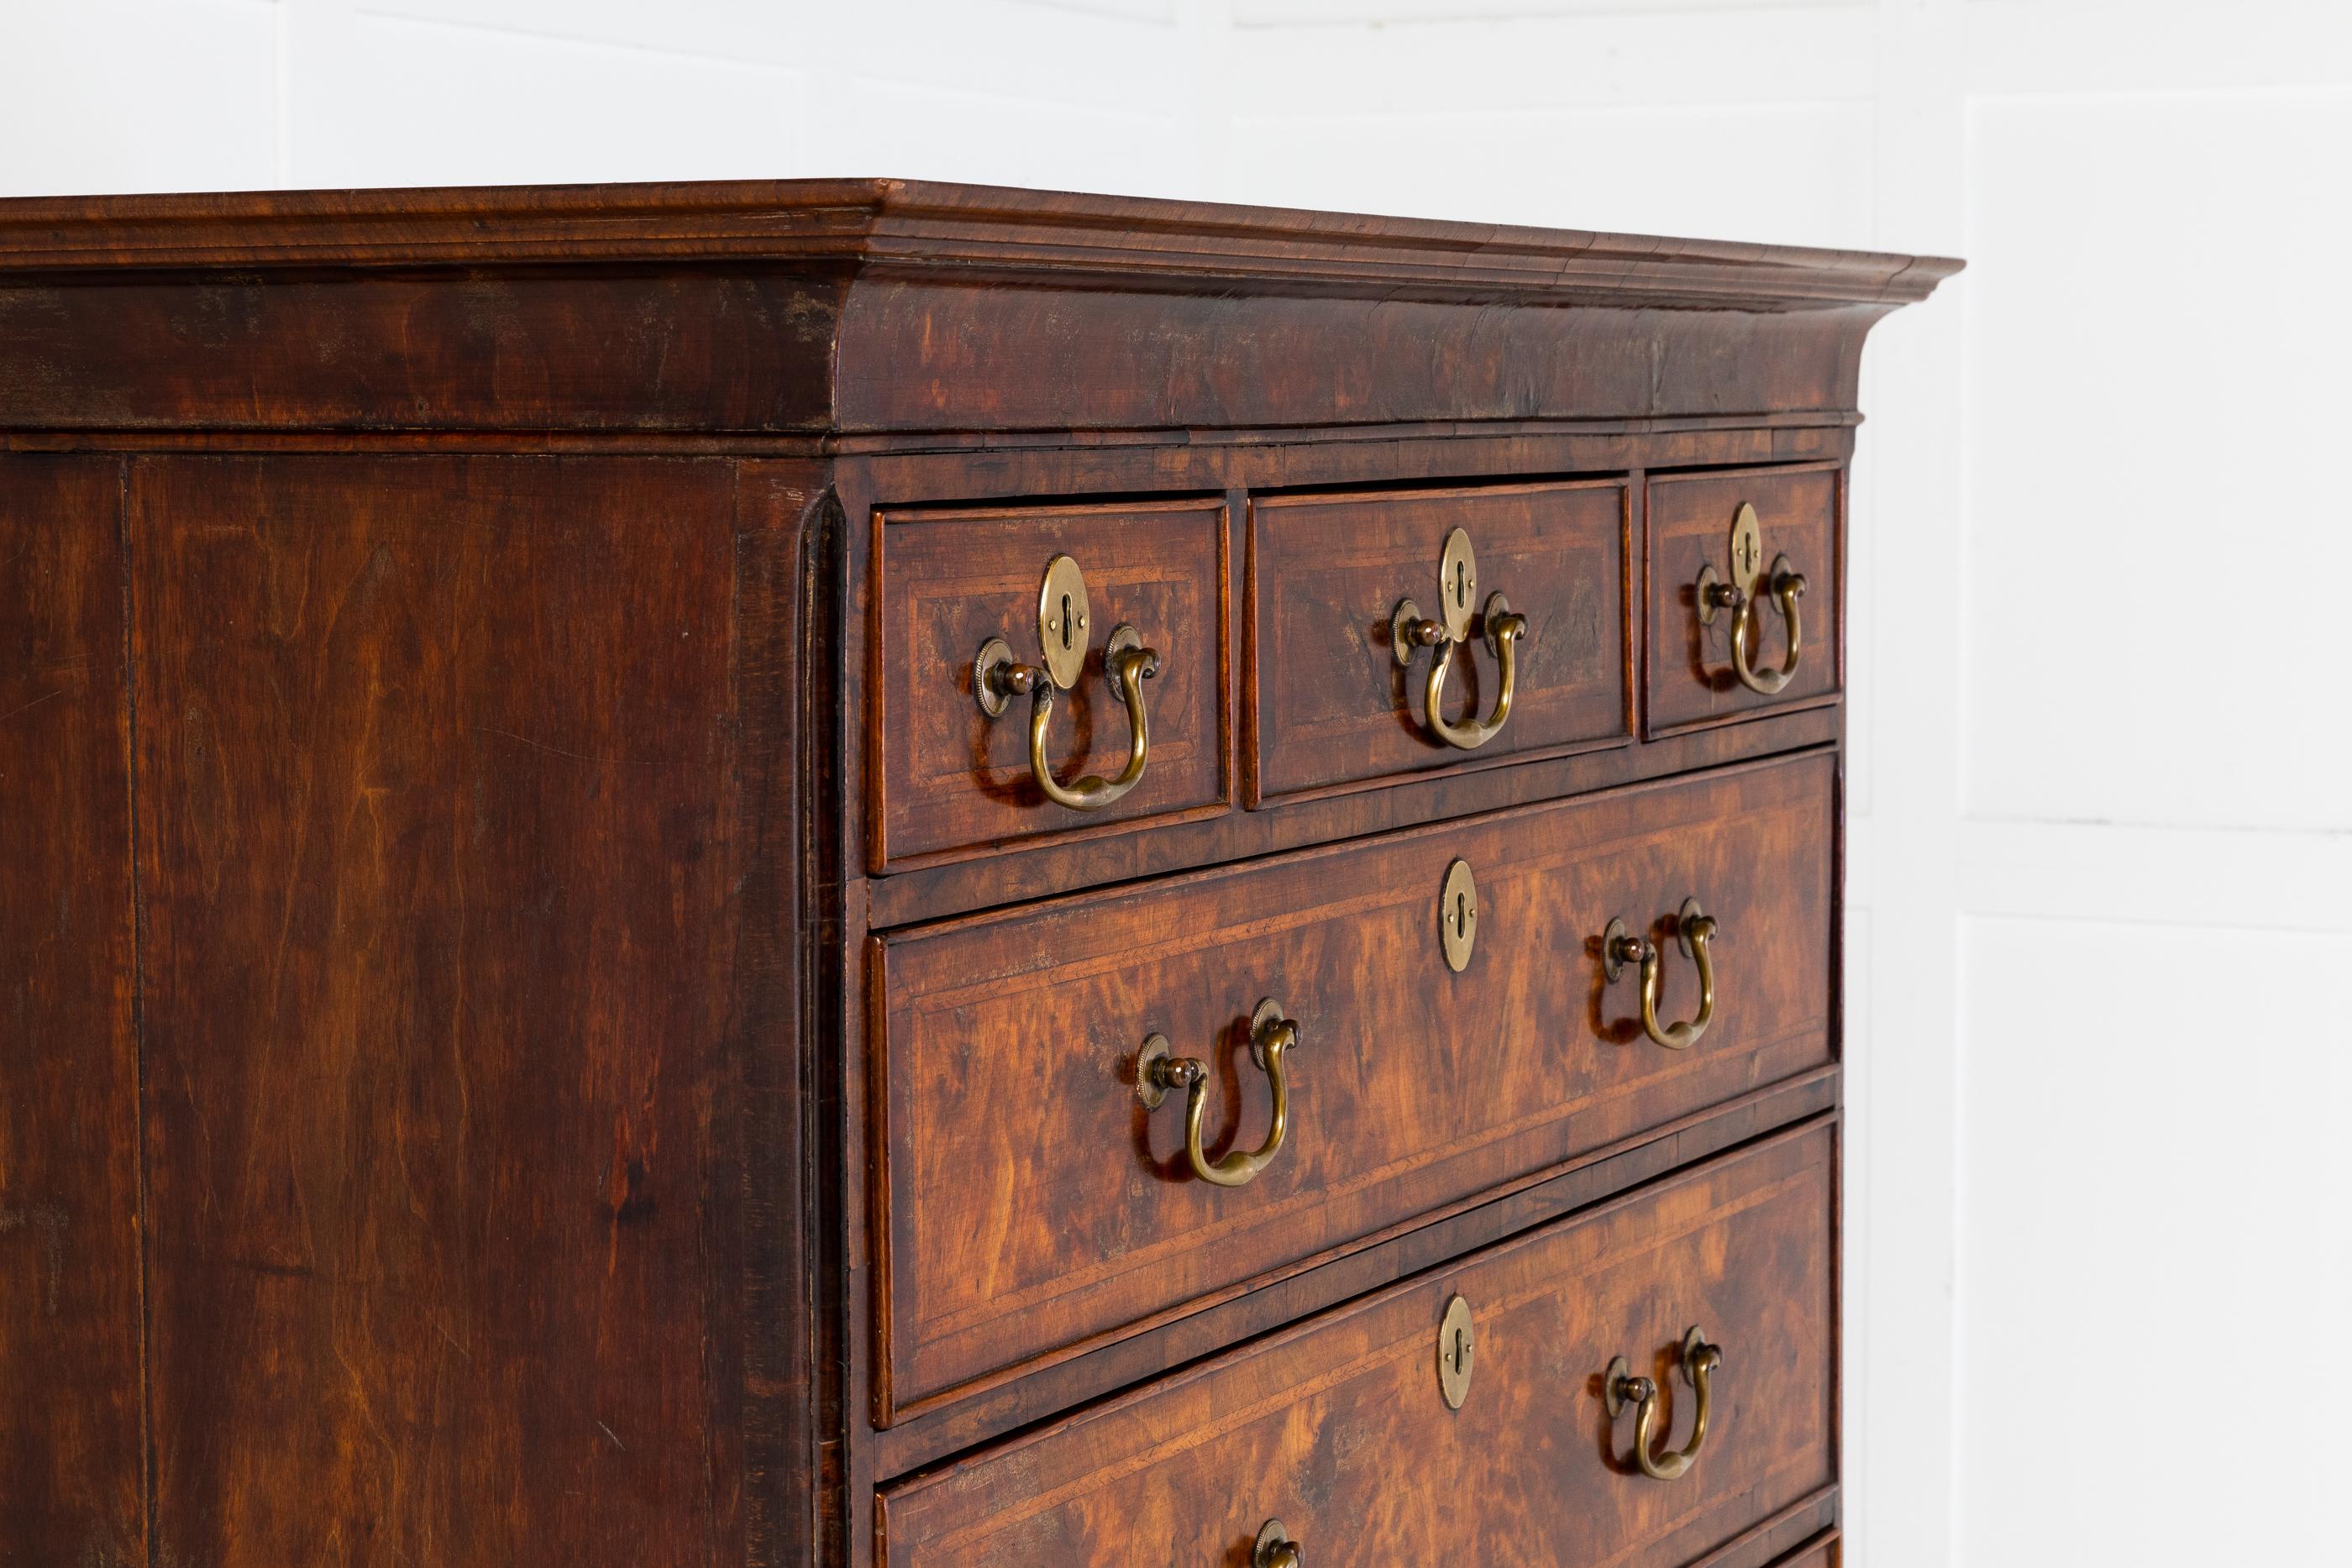 Early 18th Century English walnut chest on chest having brushing slide, with excellent choice of quality walnut veneer. Having delicate narrow moulded detail to the corners of the upper section.

The upper chest, consisting of three short drawers